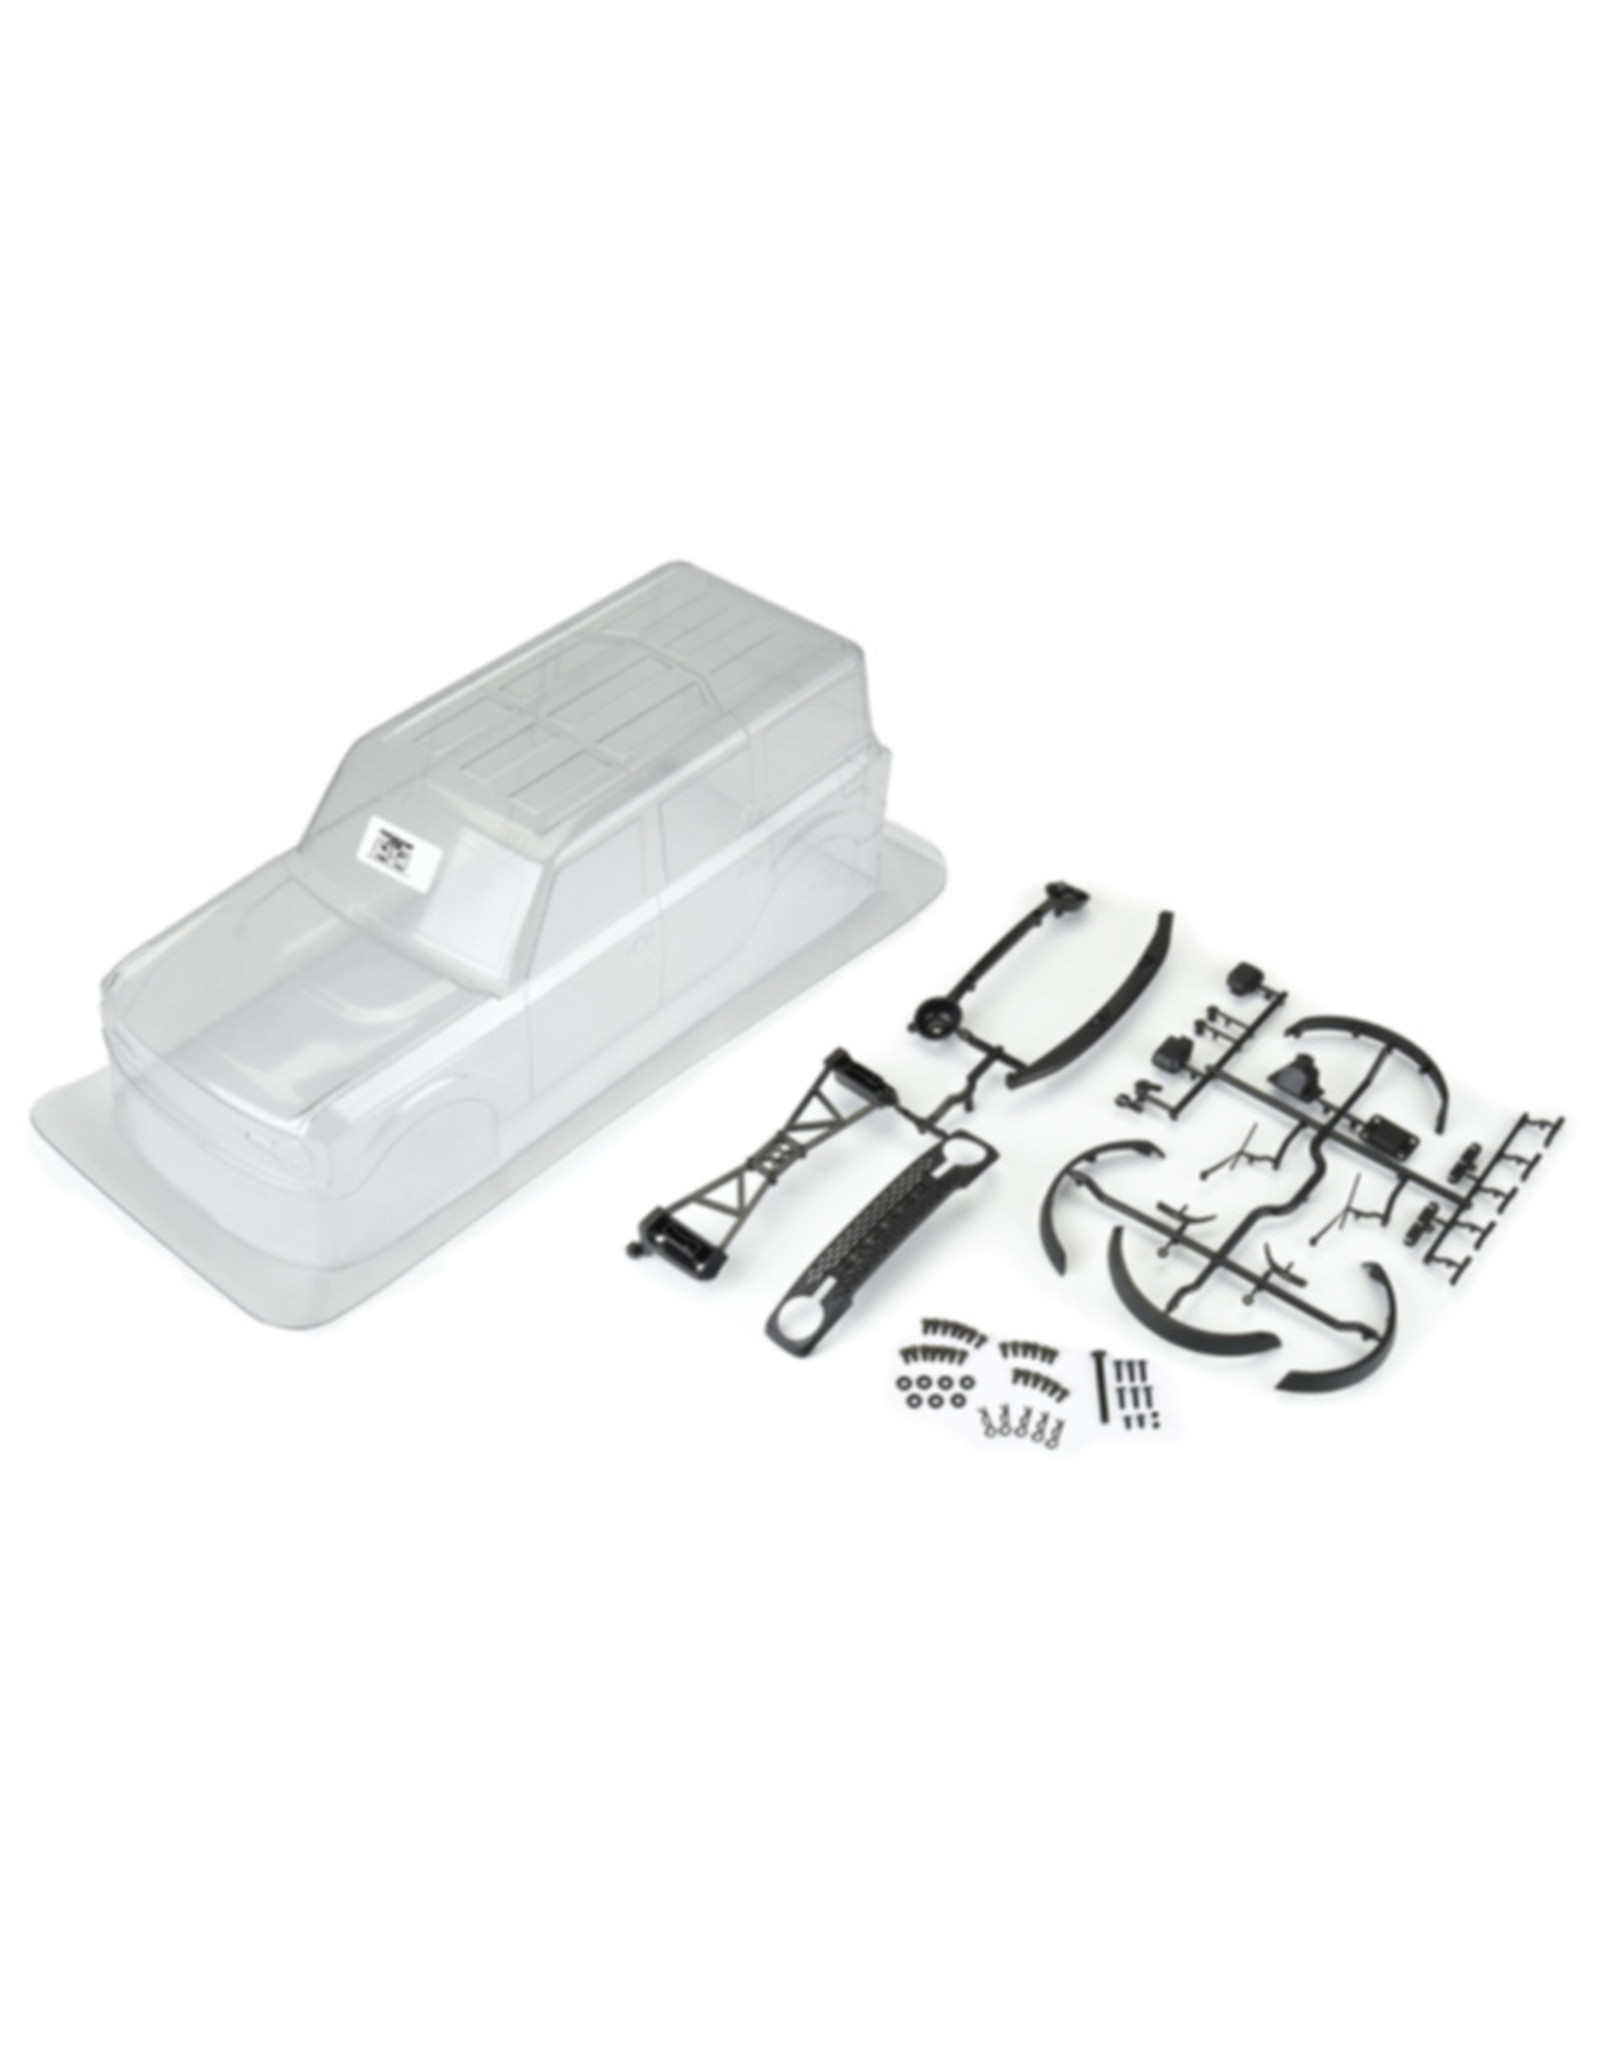 Pro-Line Racing PRO357000  1/10 2021 Ford Bronco Clear Body Set 12.3" Wheelbase: Crawlers